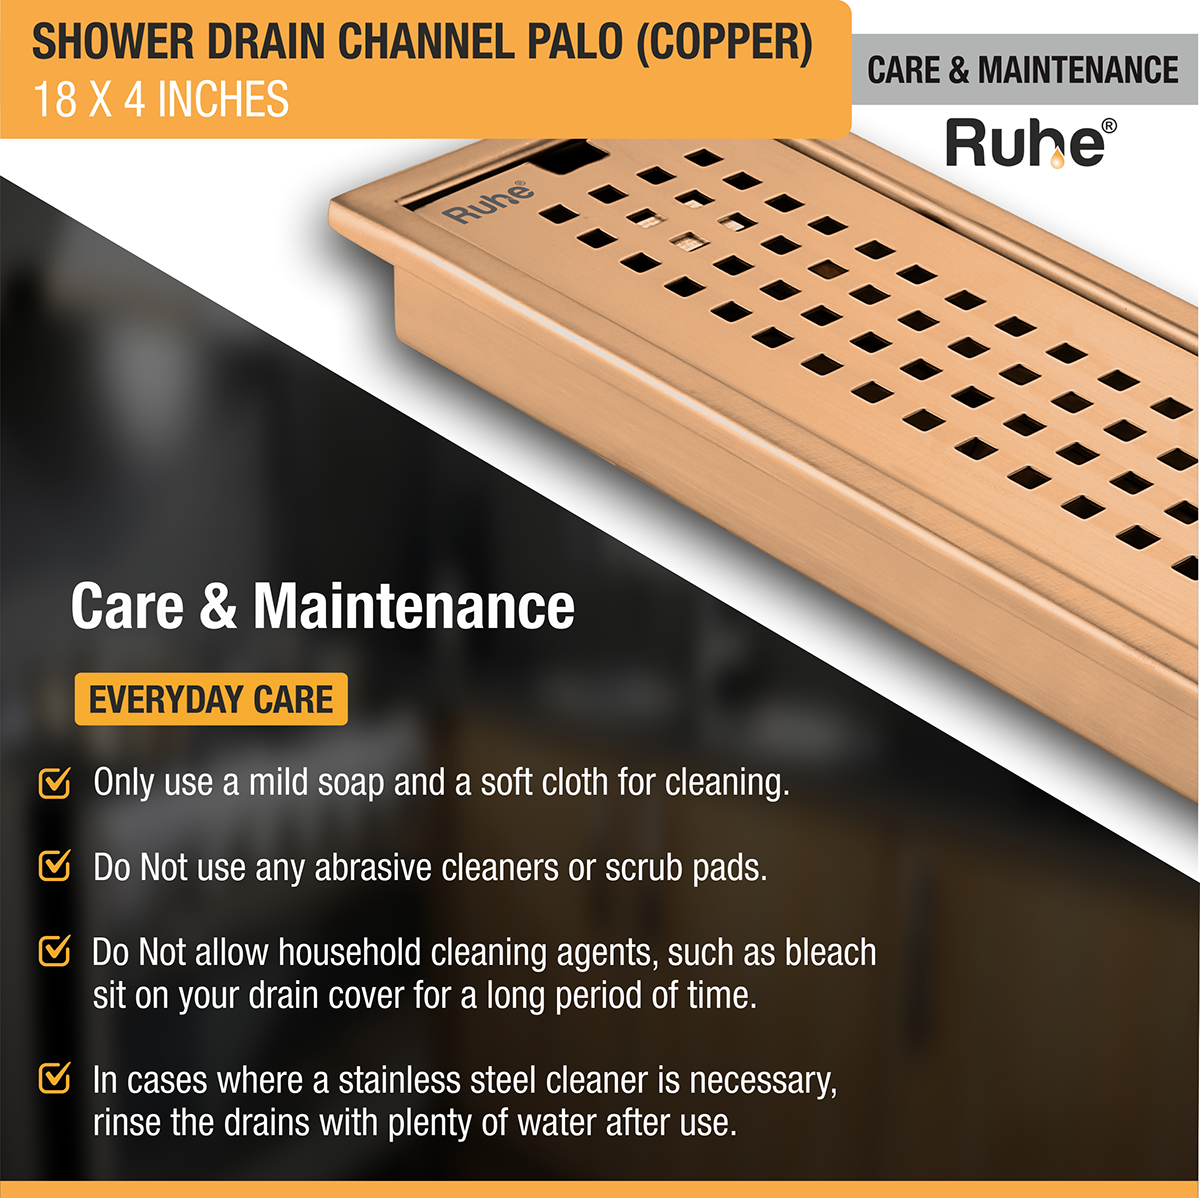 Palo Shower Drain Channel (18 x 4 Inches) ROSE GOLD/ANTIQUE COPPER care and maintenance